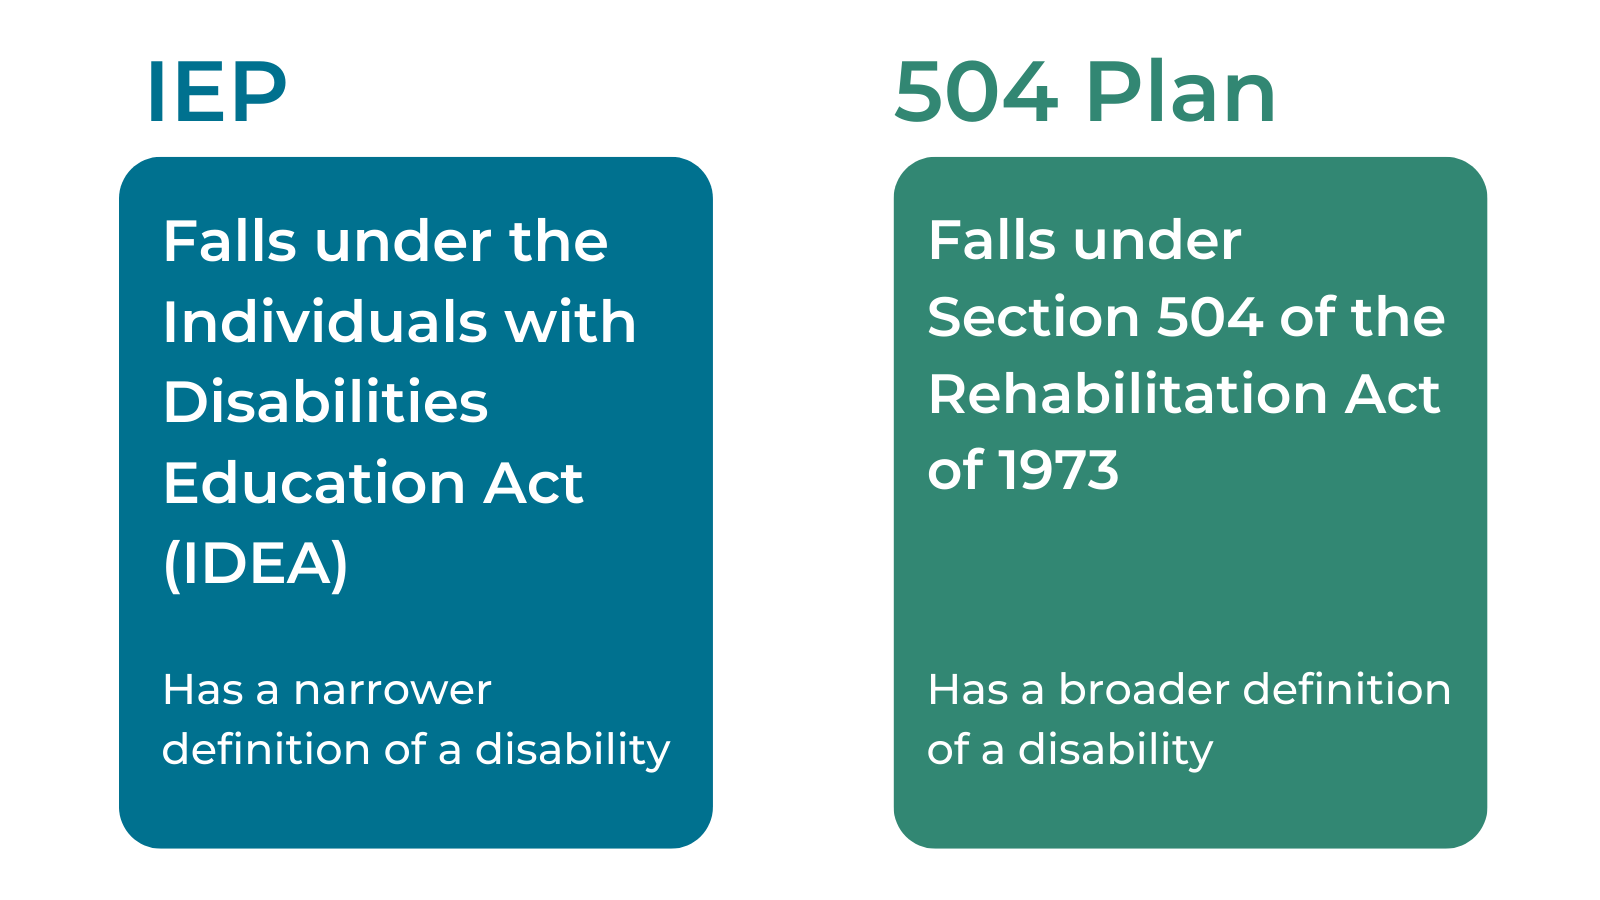 IEP: Falls under the Individuals with Disabilities Education Act (IDEA) Has a narrower definition of Disability. 

504 Plan: Falls under Section 504 of the Rehabilitation Act of 1973, has a broader definition of disability. 